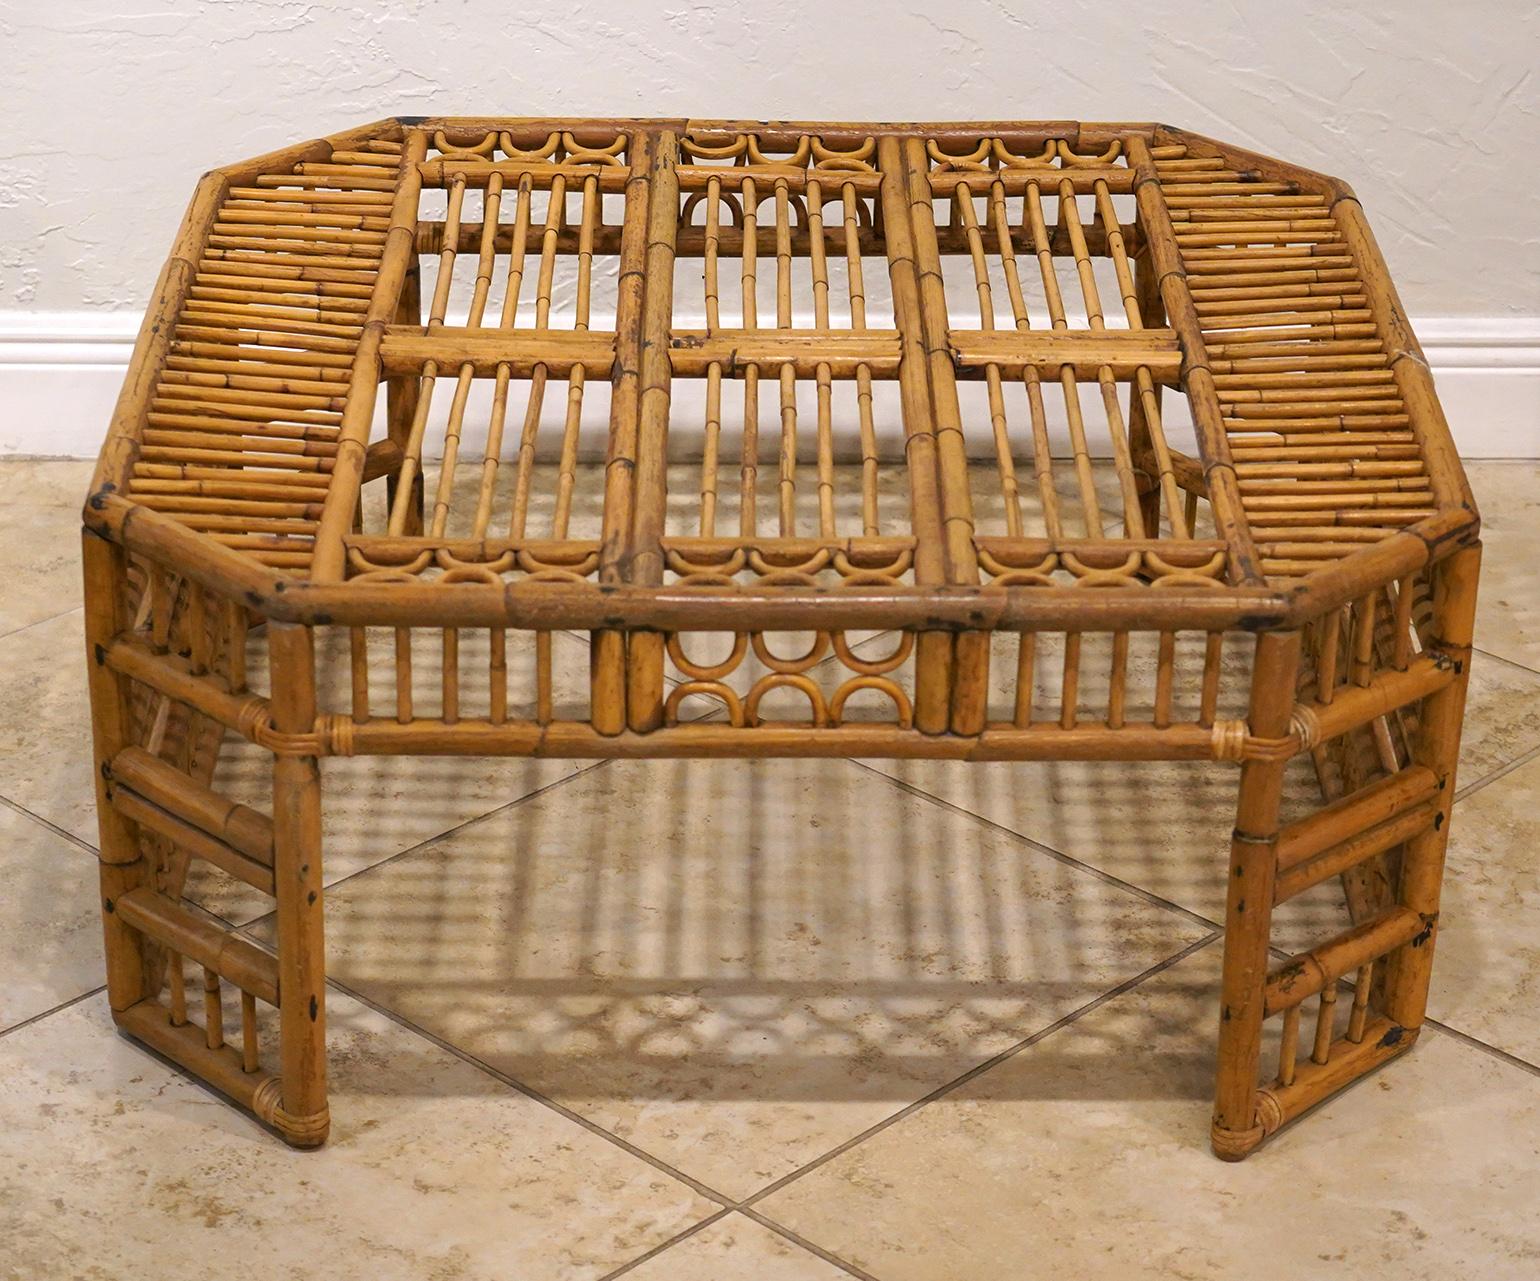 Of attractive proportions and traditional craftsmanship this Brighton Pavilion Chinese Chippendale style coffee table has almost sculptural qualities. It can be used as is or a glass top can be added.